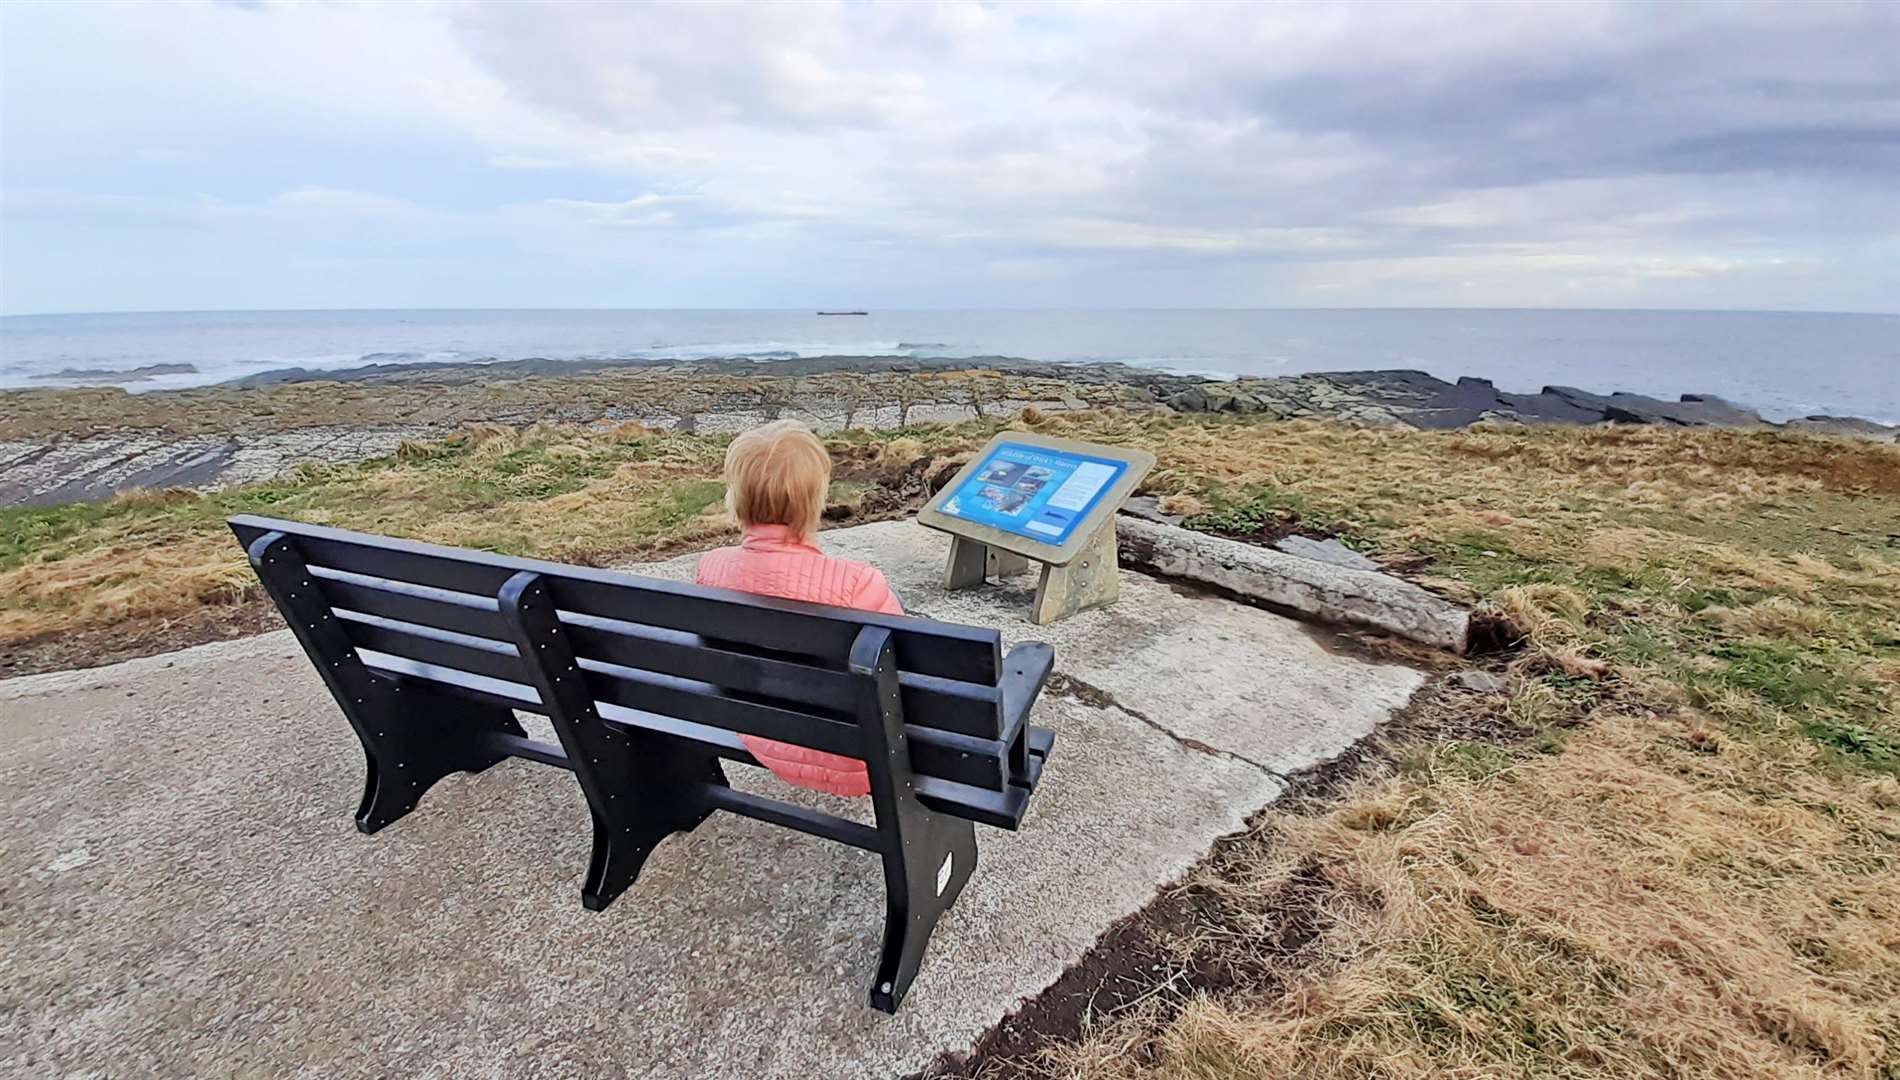 The new bench at Wick's North Head provides a resting place for walkers and offers panoramic views out over the bay.